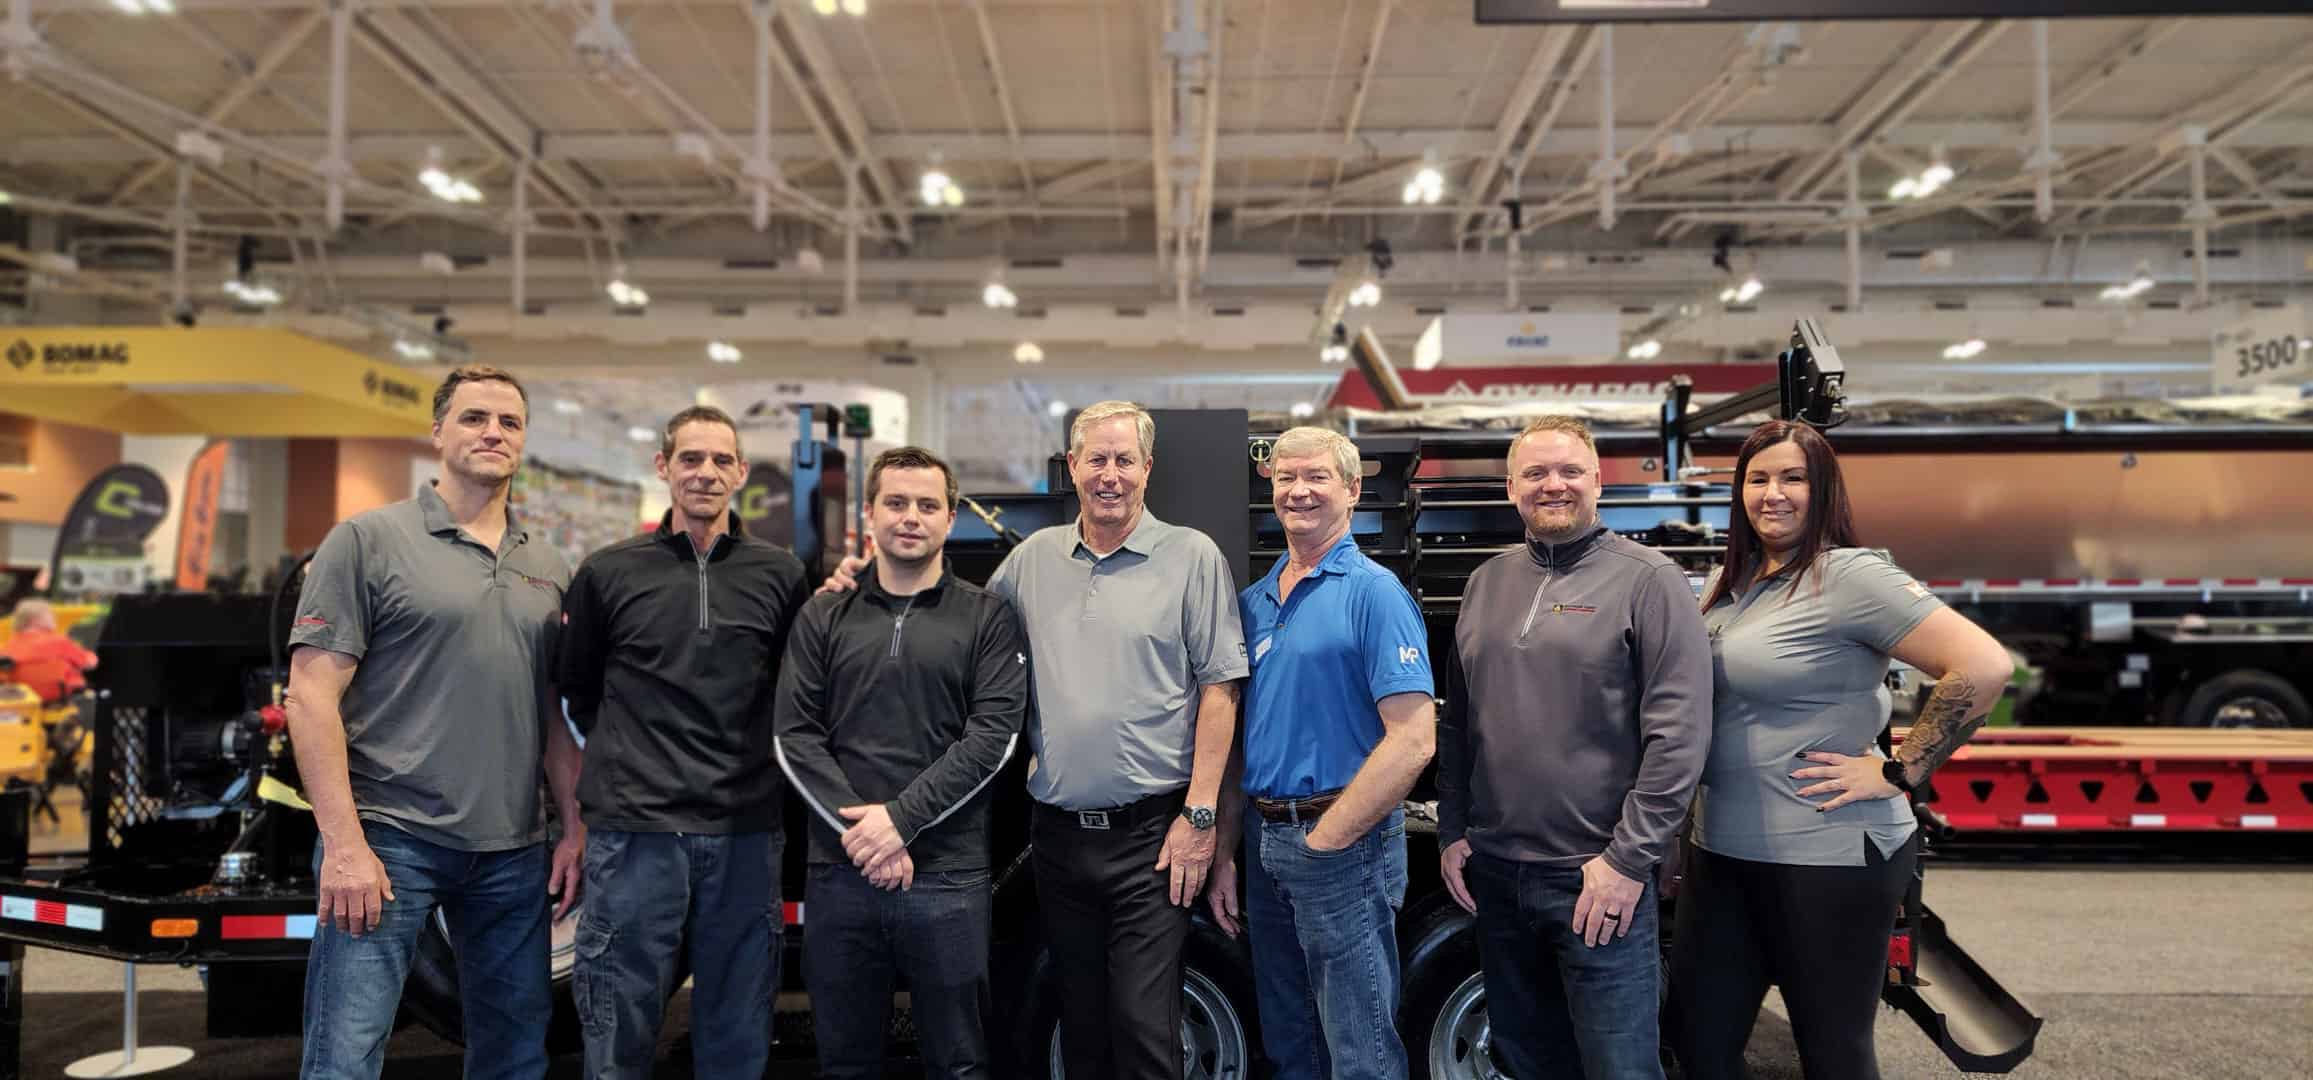 Marathon’s World Of Asphalt Sales Team – From left to right: Chris(from Asphalt Care), Mark Gibbs, Phillip Rousseau, Marc Rousseau, Rick Stone(from Maxwell Products) Bill(from Asphalt Care) and Jennifer Brasher